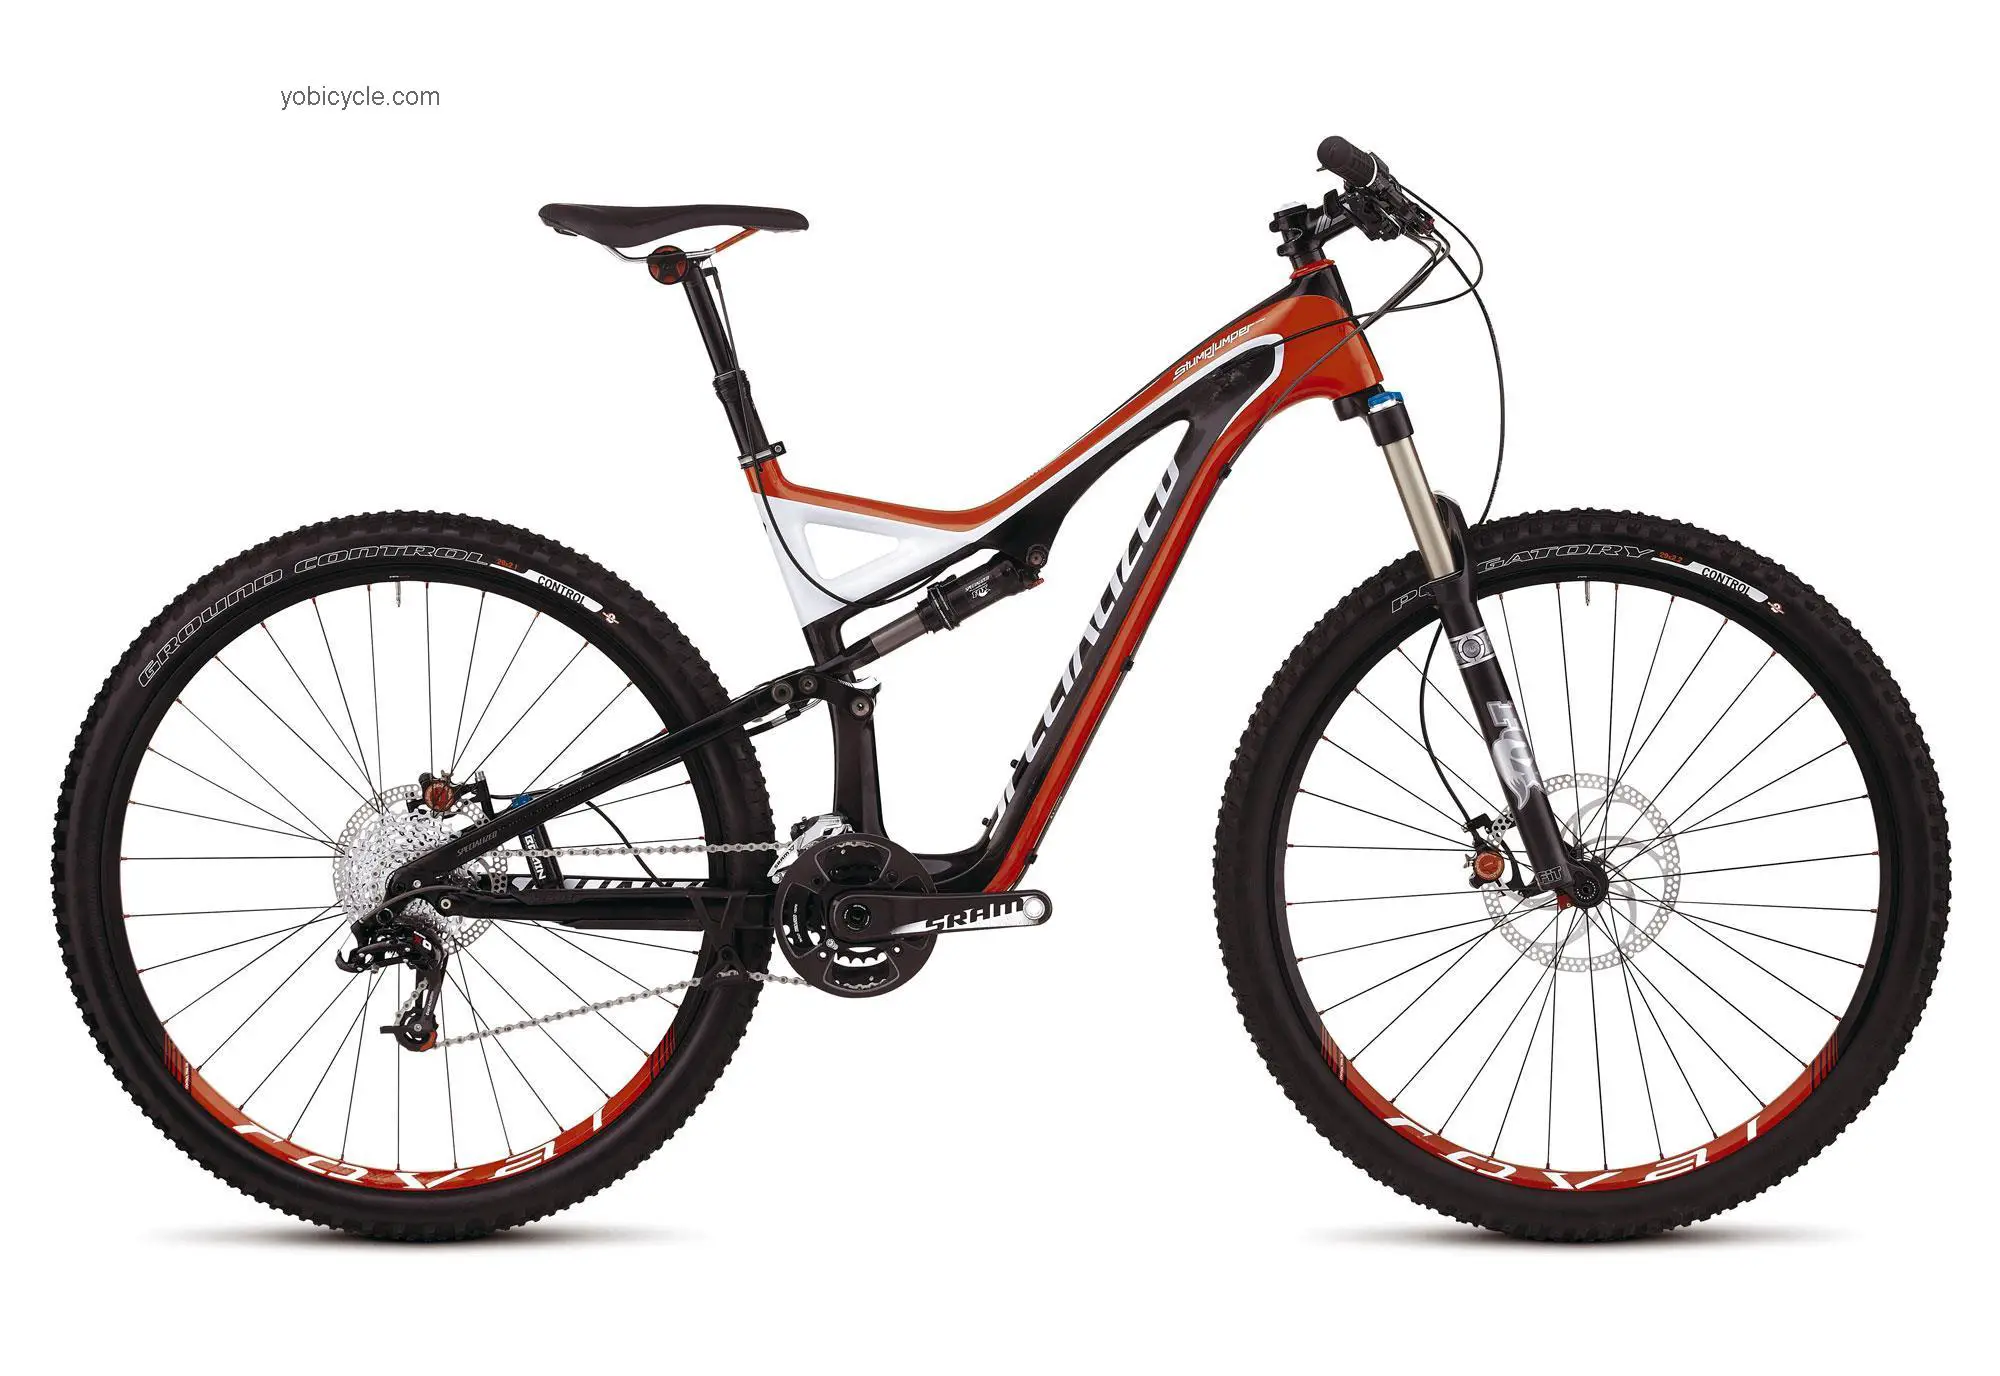 Specialized Stumpjumper FSR Expert Carbon 29 competitors and comparison tool online specs and performance